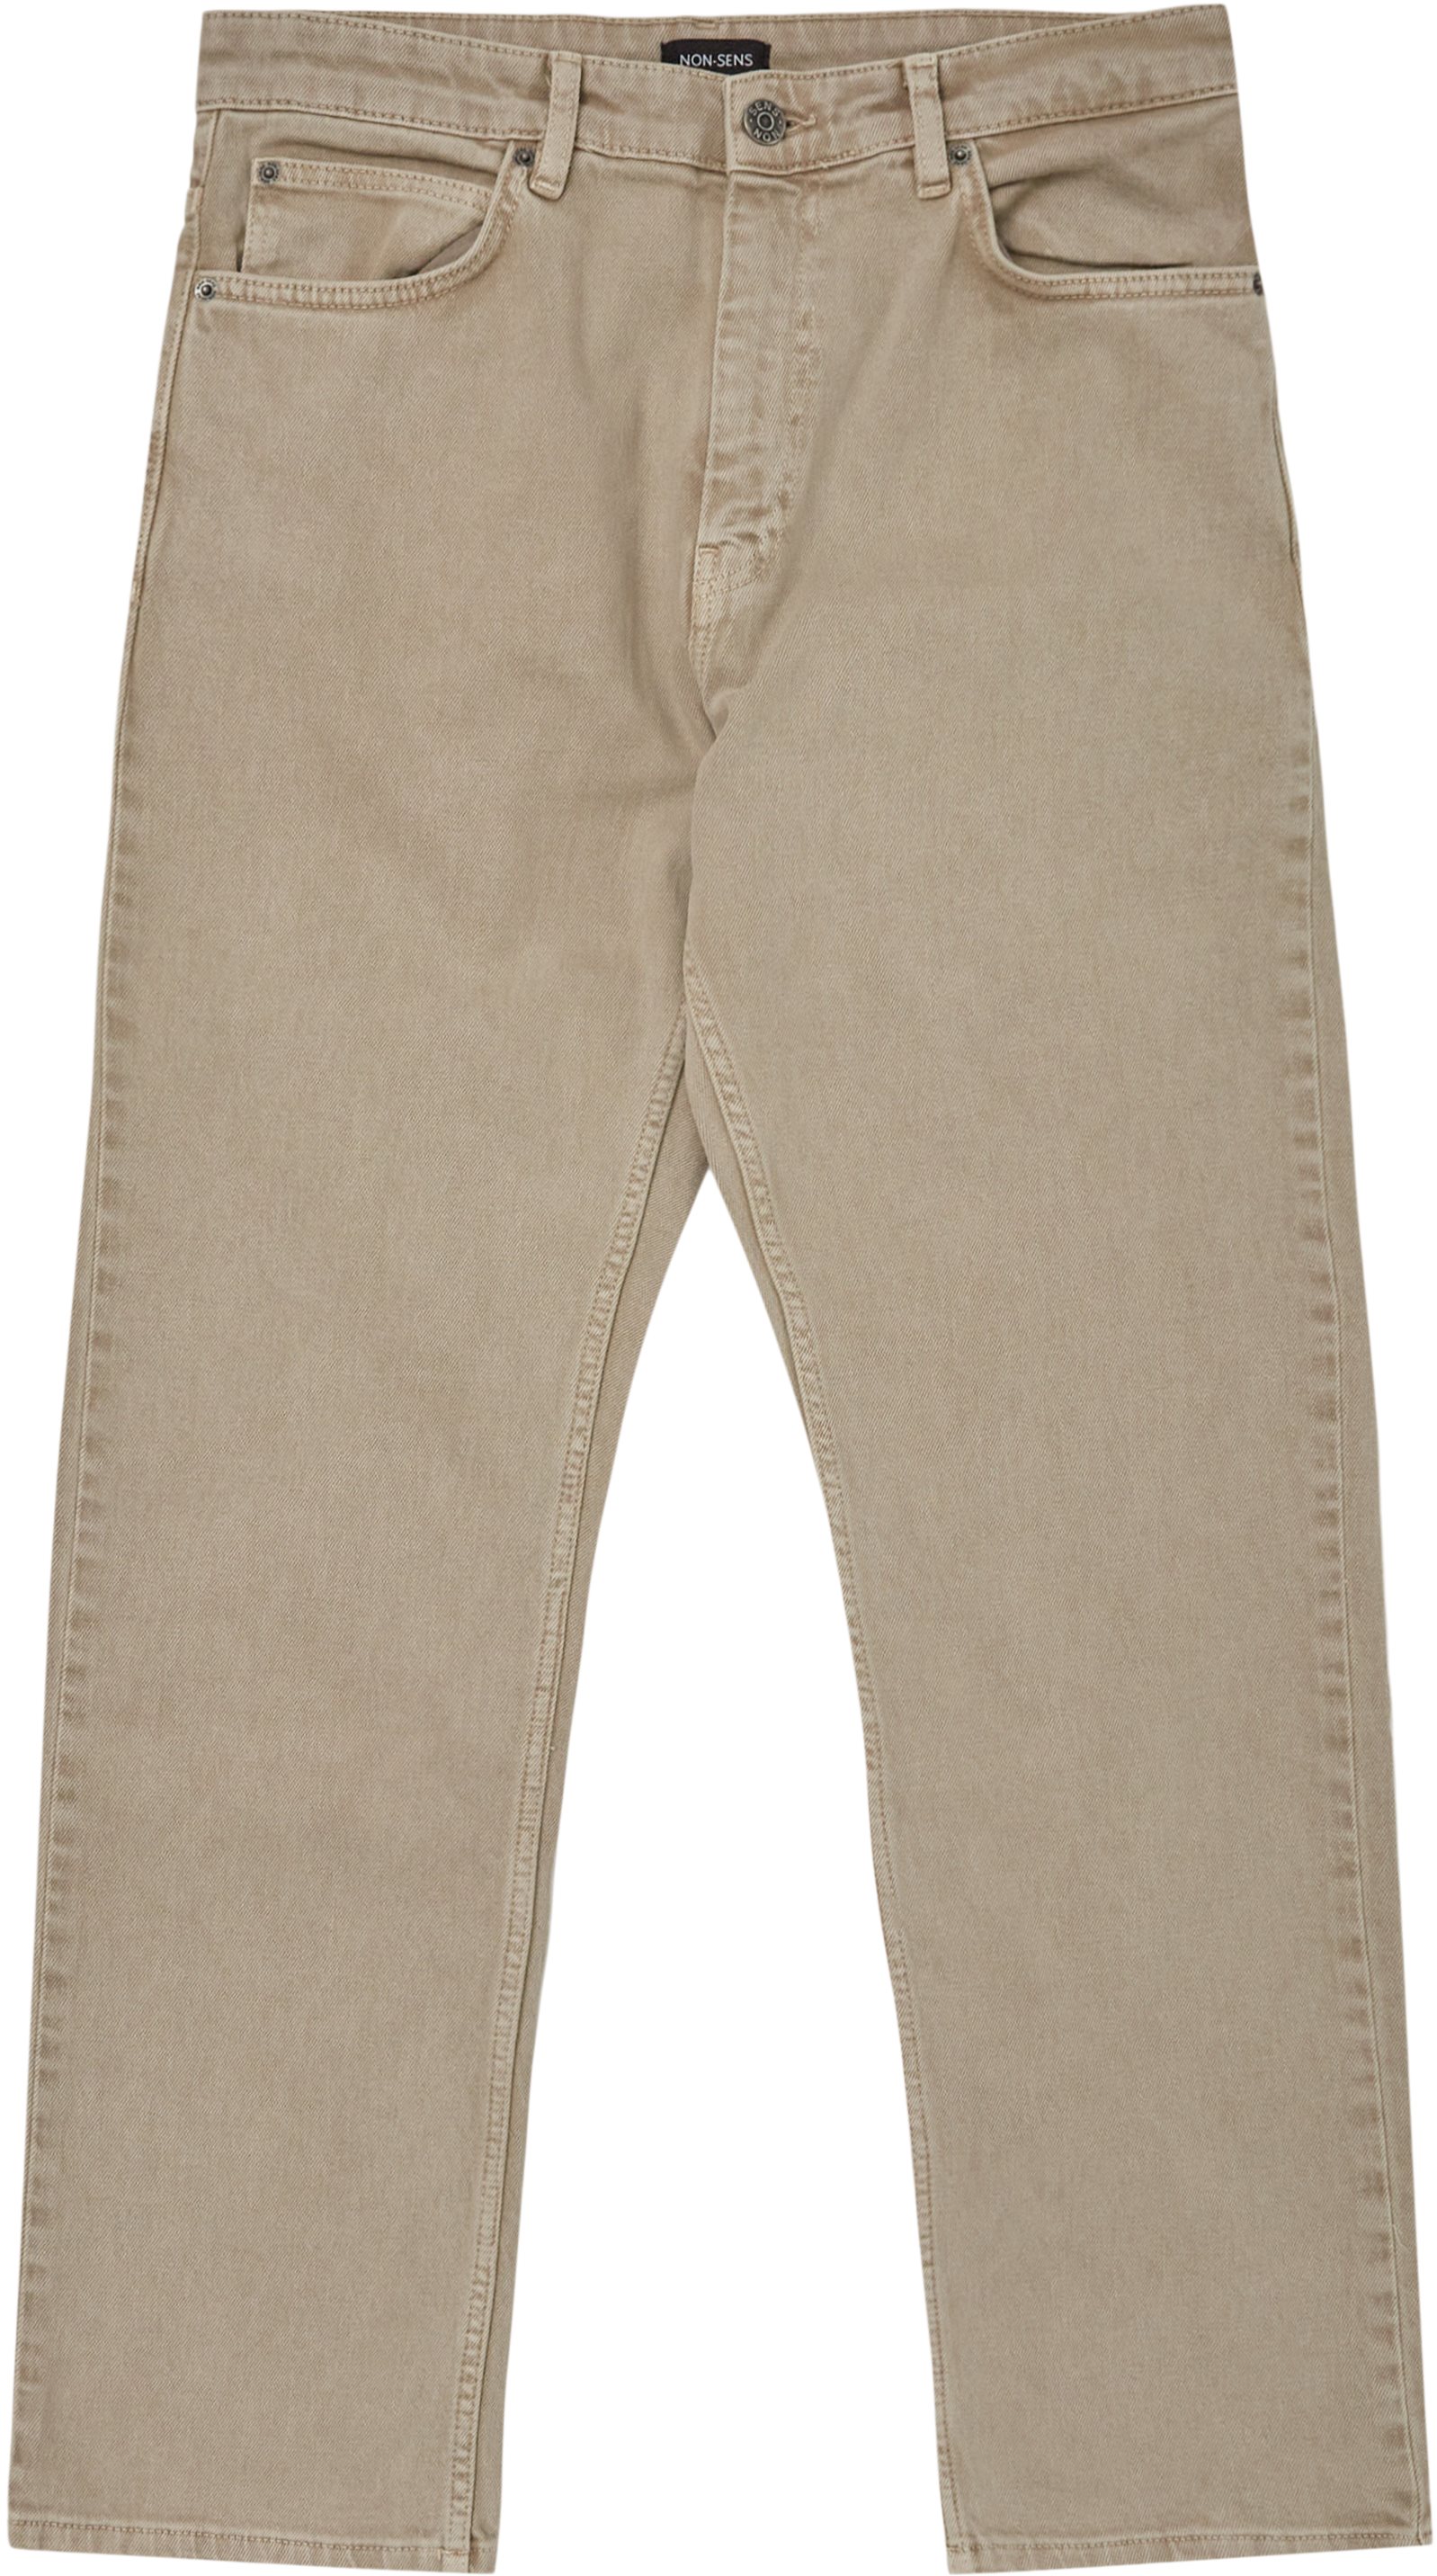 Vermont Marble Jeans - Jeans - Straight fit - Sand